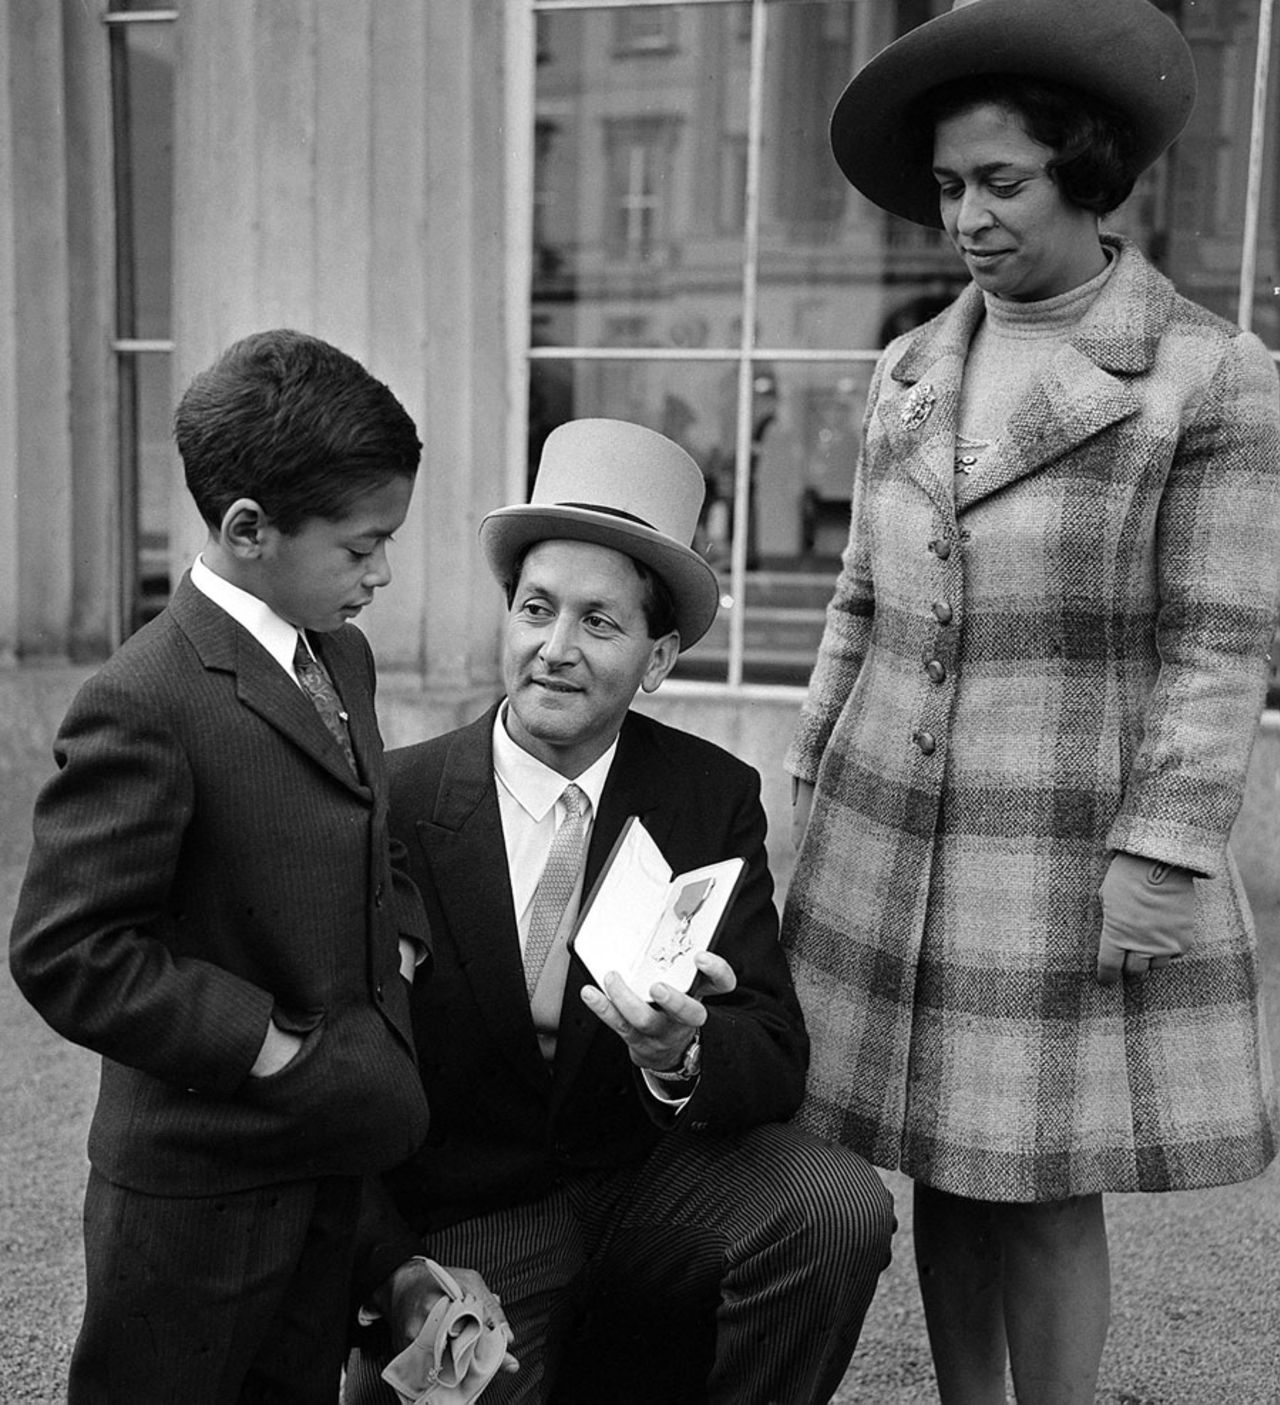 Basil D'Oliveira shows his OBE to his son Damian and wife Naomi, London, October 29, 1969